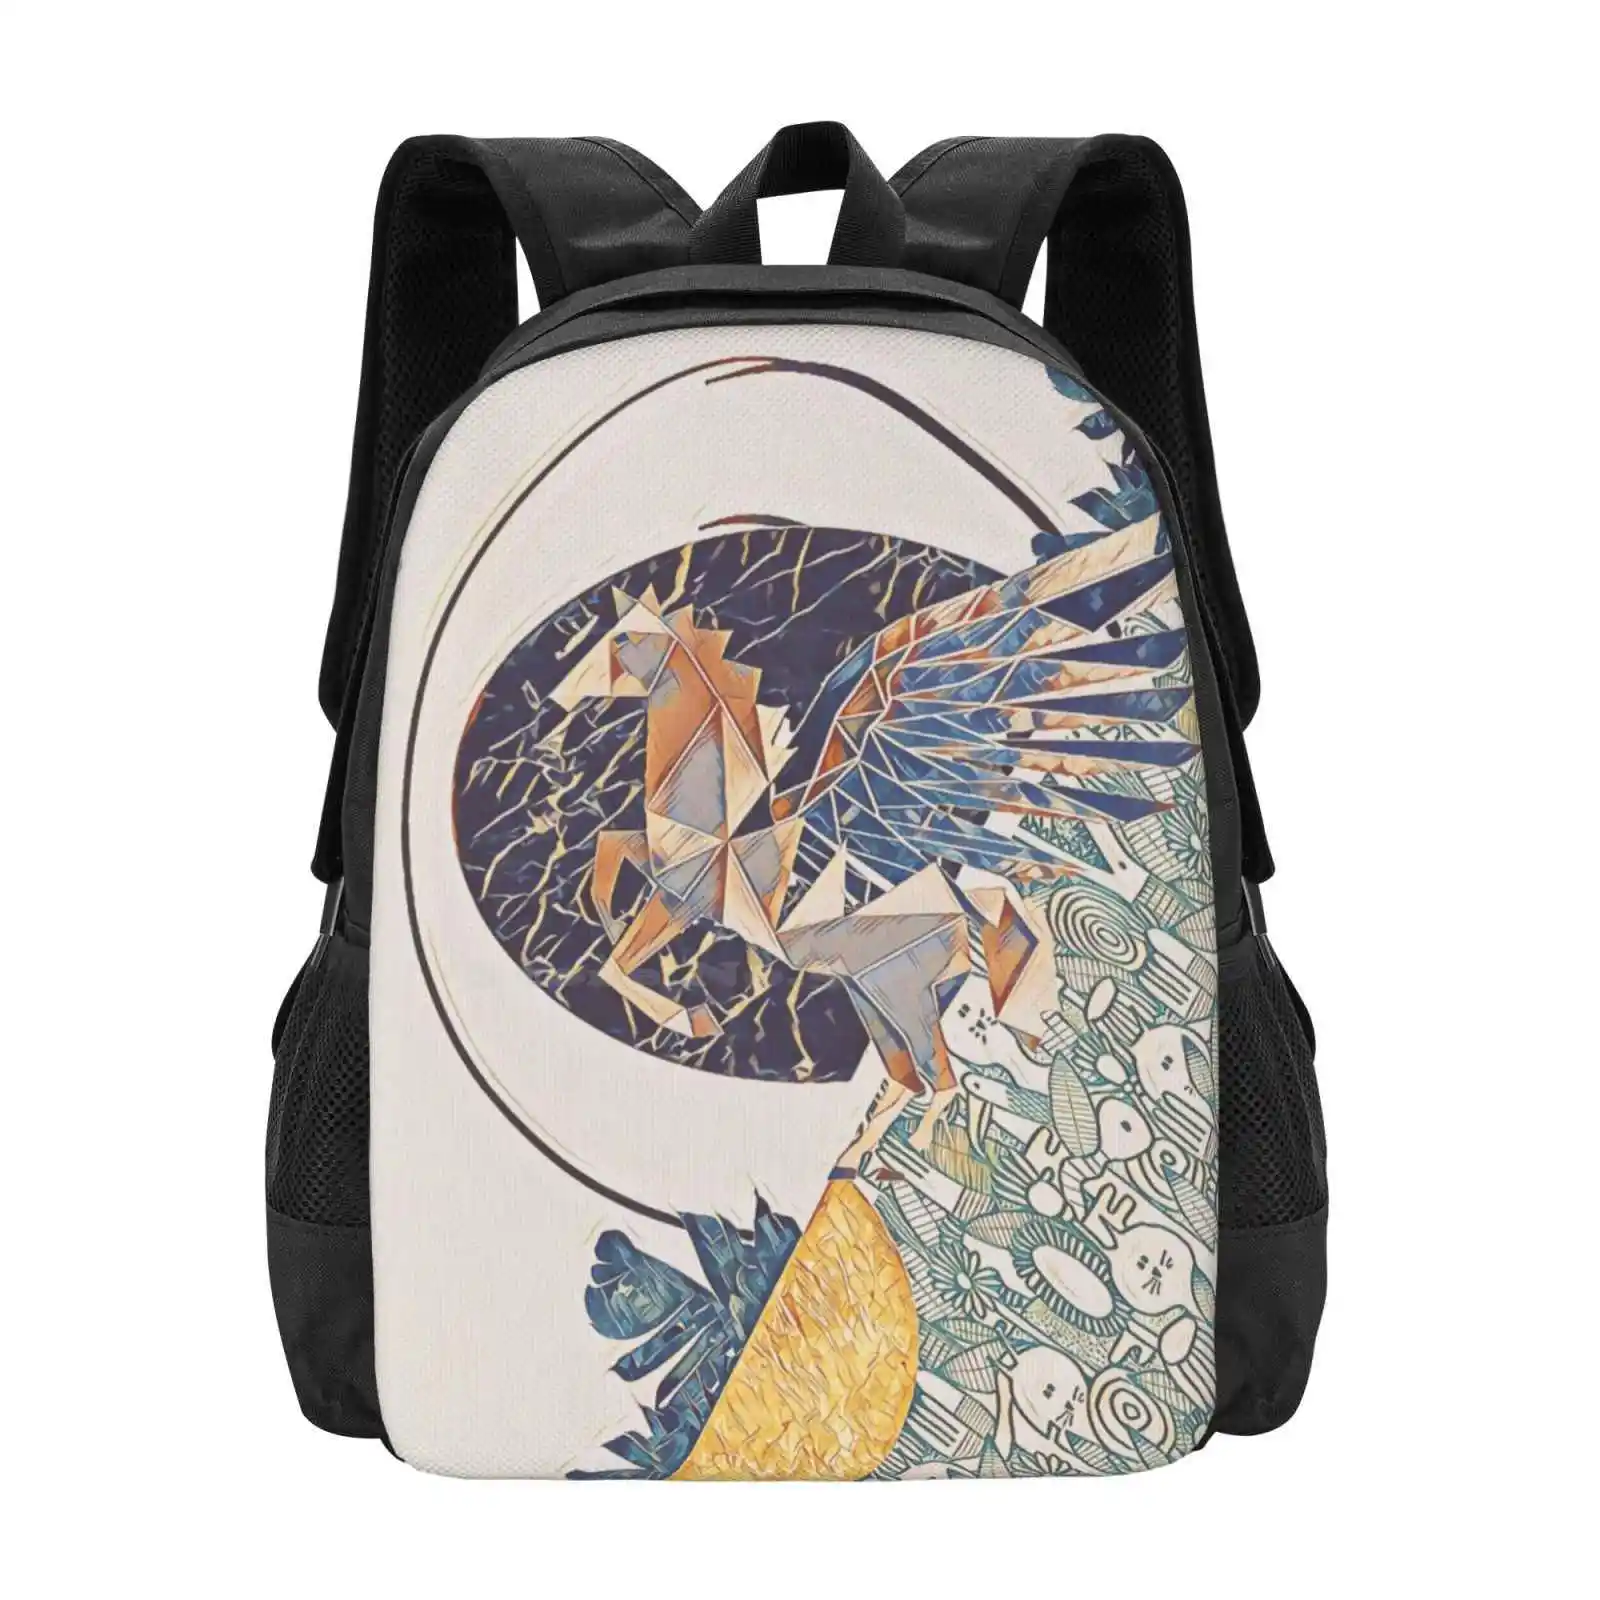 

Marble Pegasus Backpacks For School Teenagers Girls Travel Bags Abstract Pegasus Marble Leaf Nature Circle New Cute Graphic